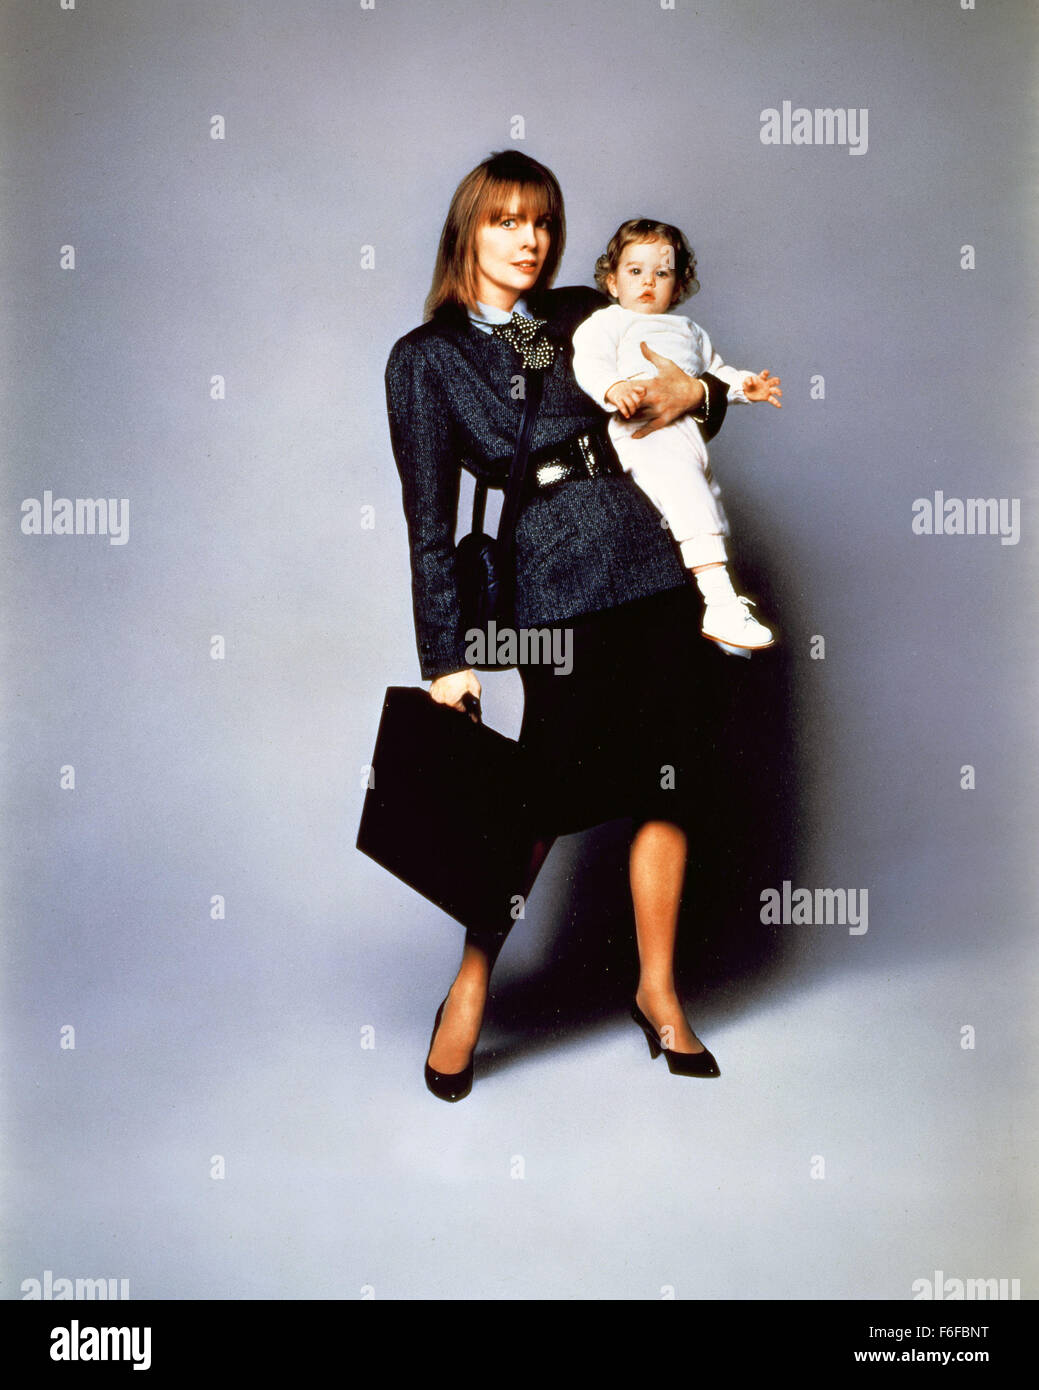 Sep 17, 1987; New York, NY, USA; DIANE KEATON as J.C. Wiatt in the romantice comedy film ''Baby Boom'' directed by Charles Shyer. Stock Photo